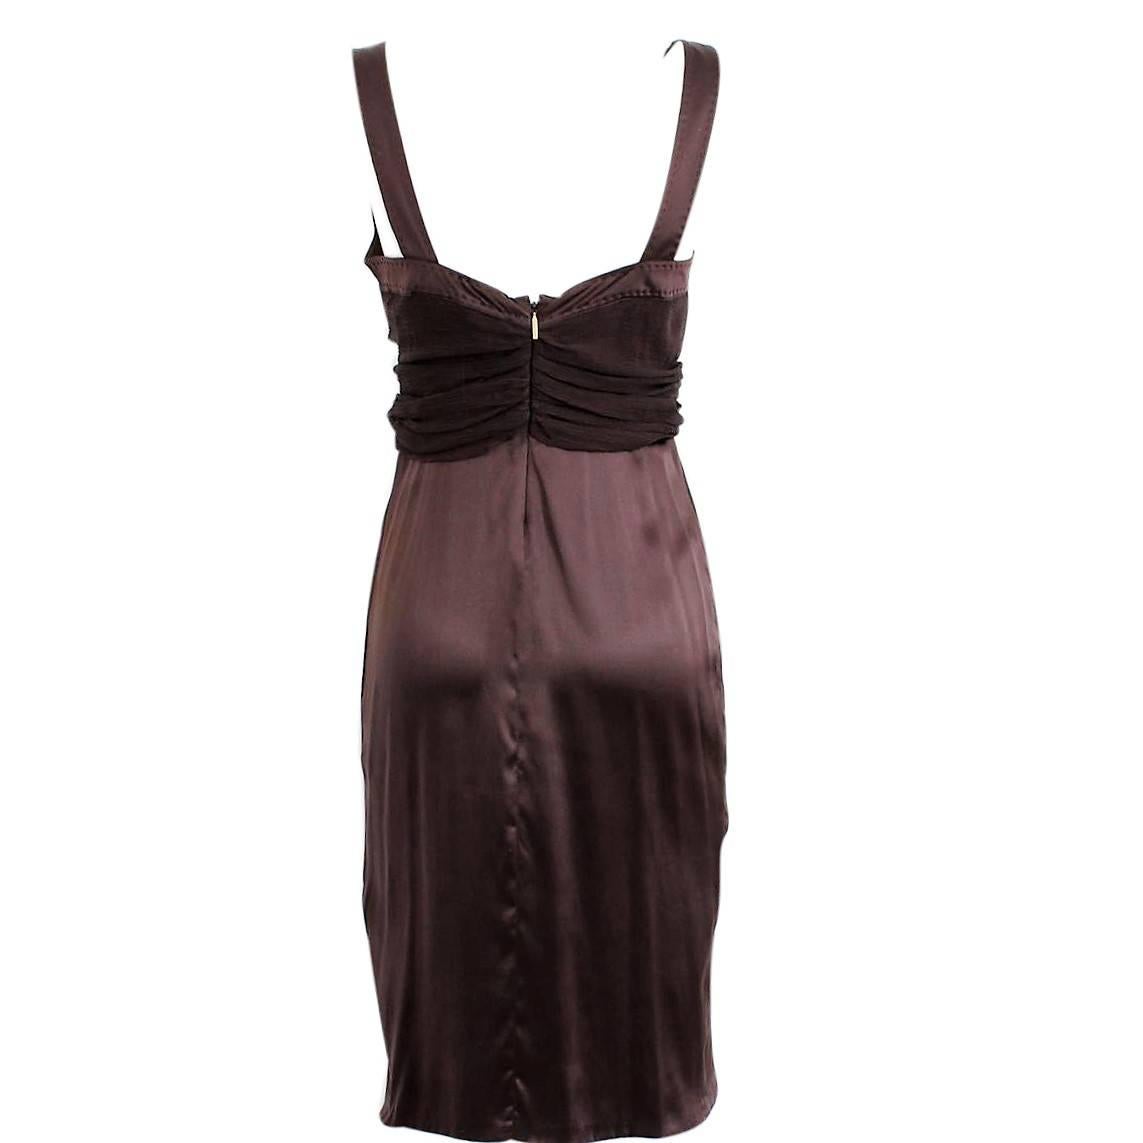 Very classy Roberto Cavalli cocktail dress
Silk
Brown color
Voile draperies on bust
Total lenght (shoulder/hem) cm 100 (39.3 inches)
Size italian 42 (US 6/8)
Made in Italy
Worldwide express shipping included in the price !